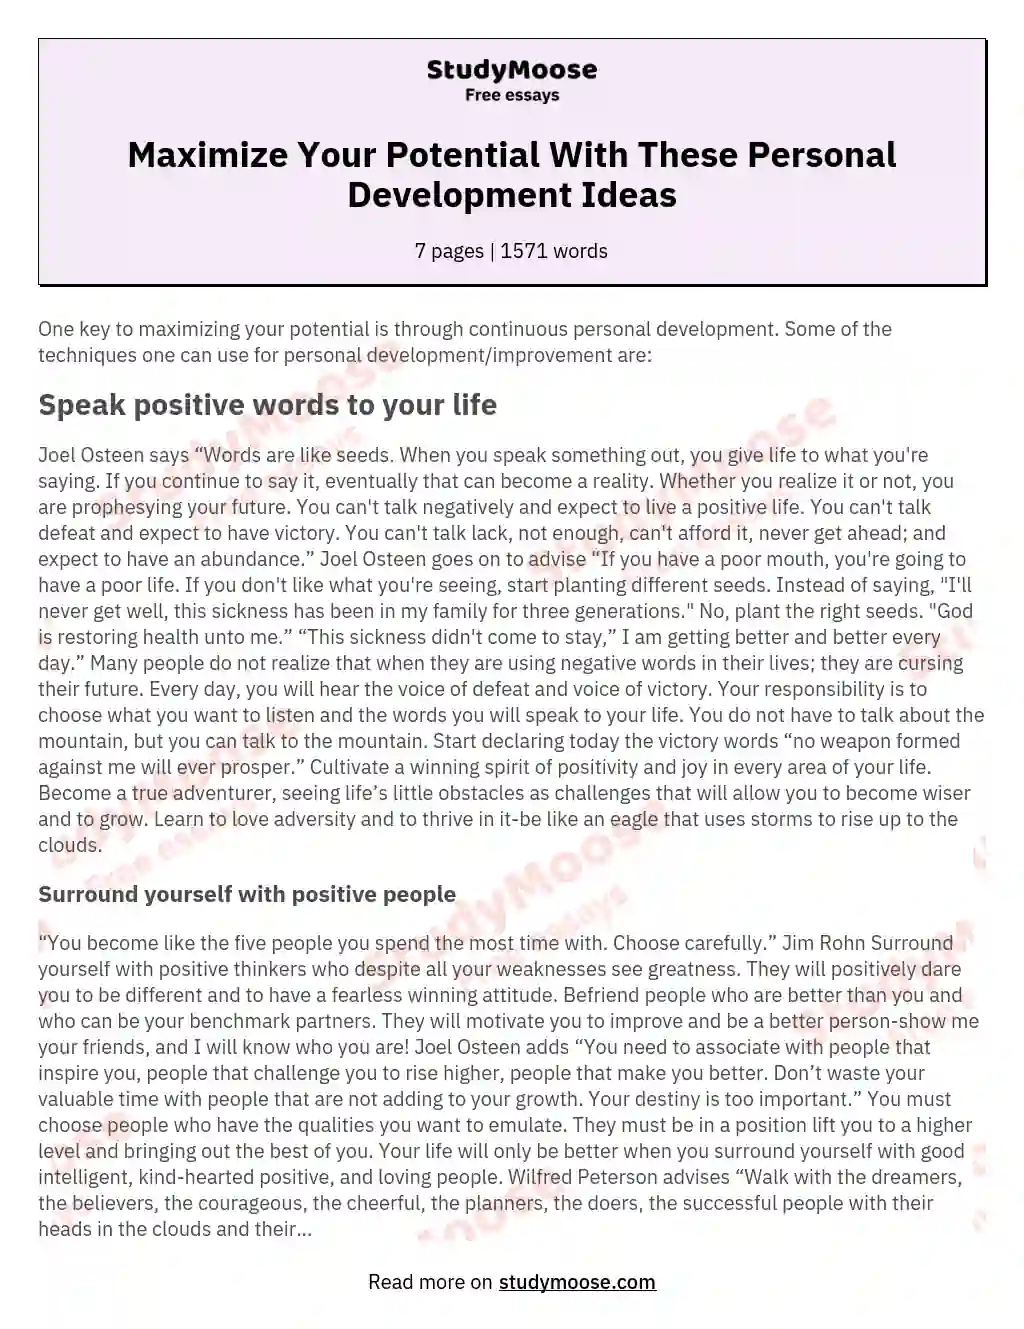 Maximize Your Potential With These Personal Development Ideas essay